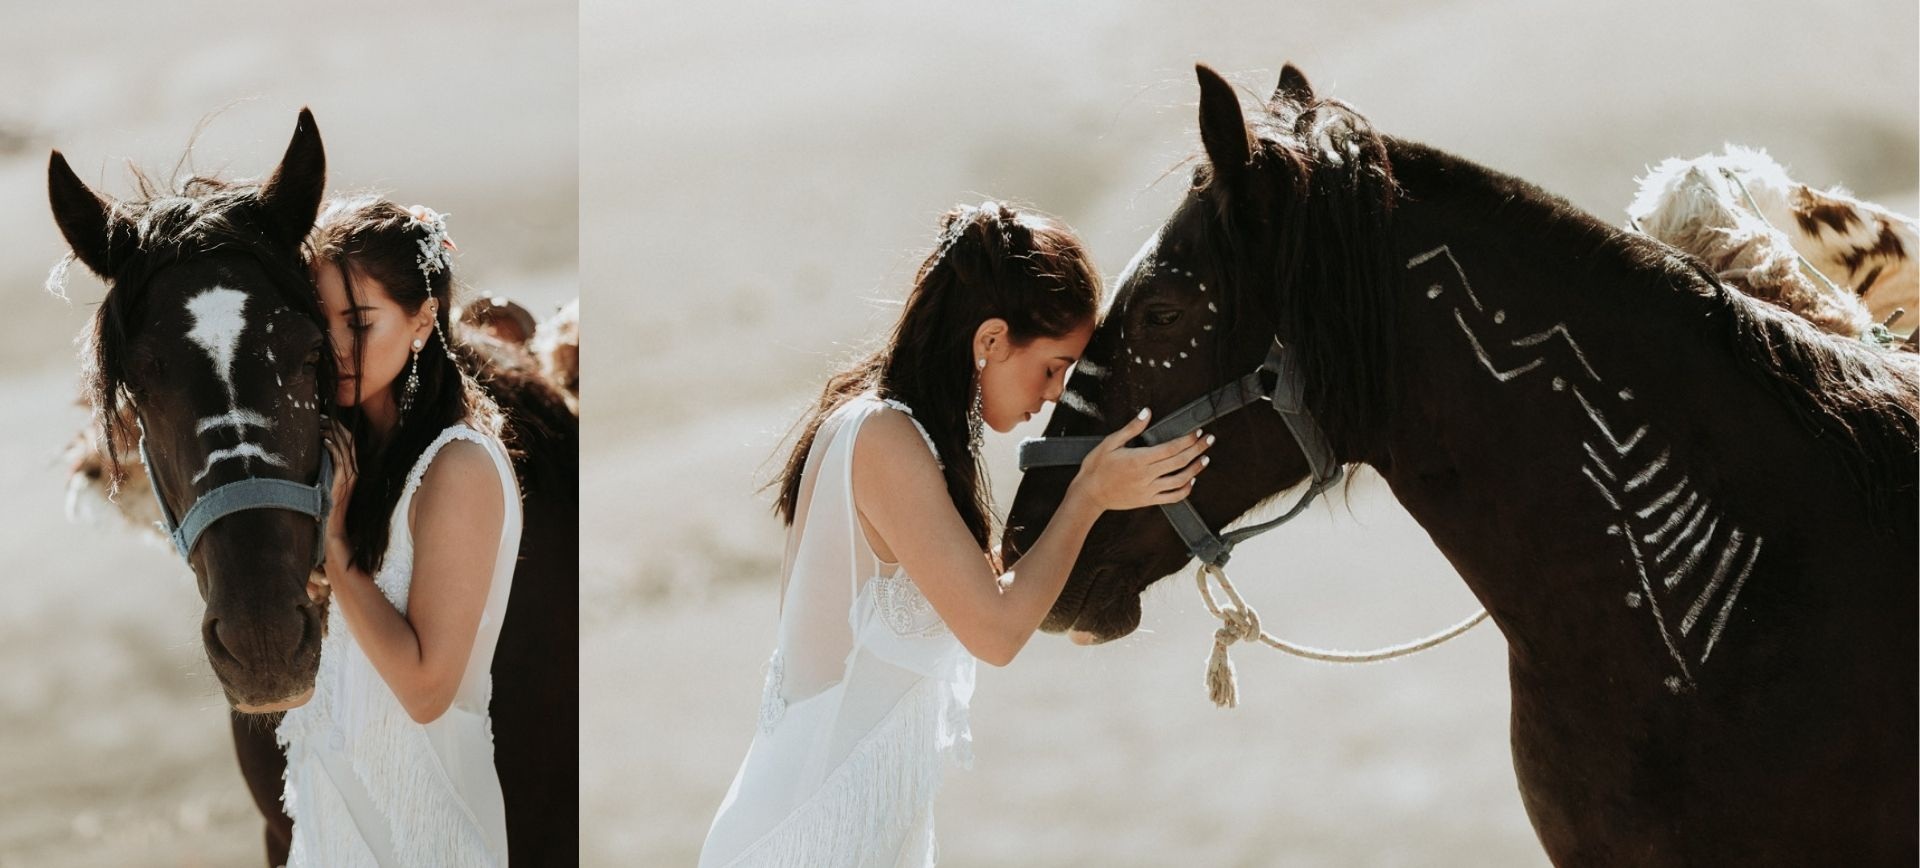 wedding on horseback - horse riding wedding in south america - bride with horse in the mountains